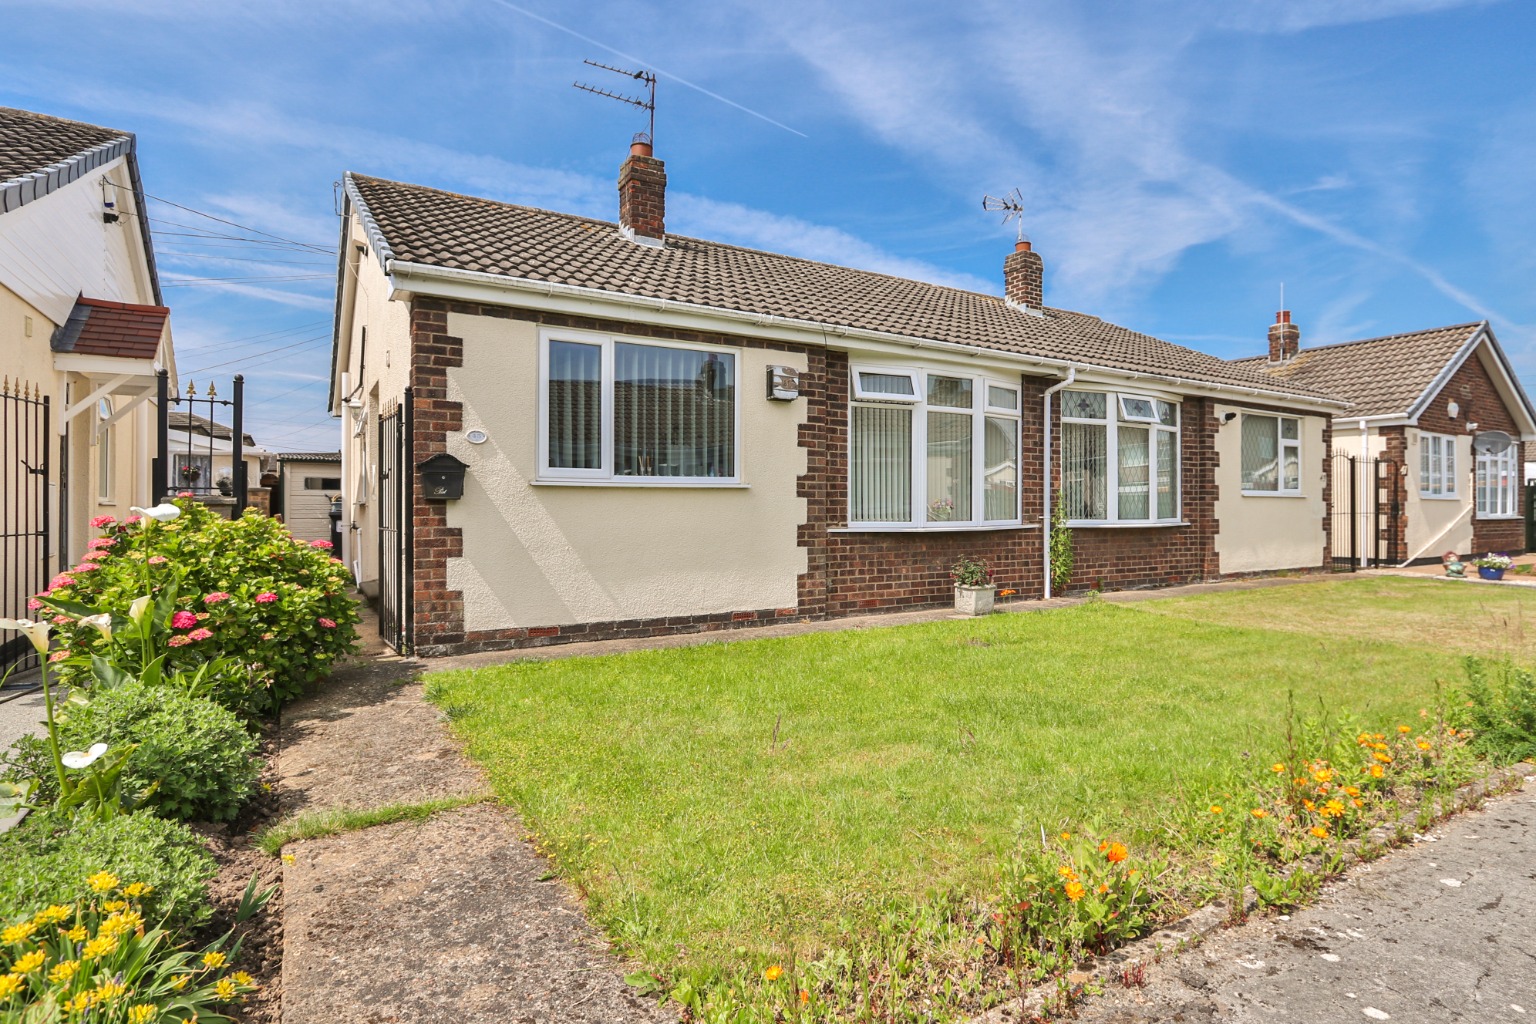 2 bed semi-detached bungalow for sale in Clarondale, Hull, HU7 